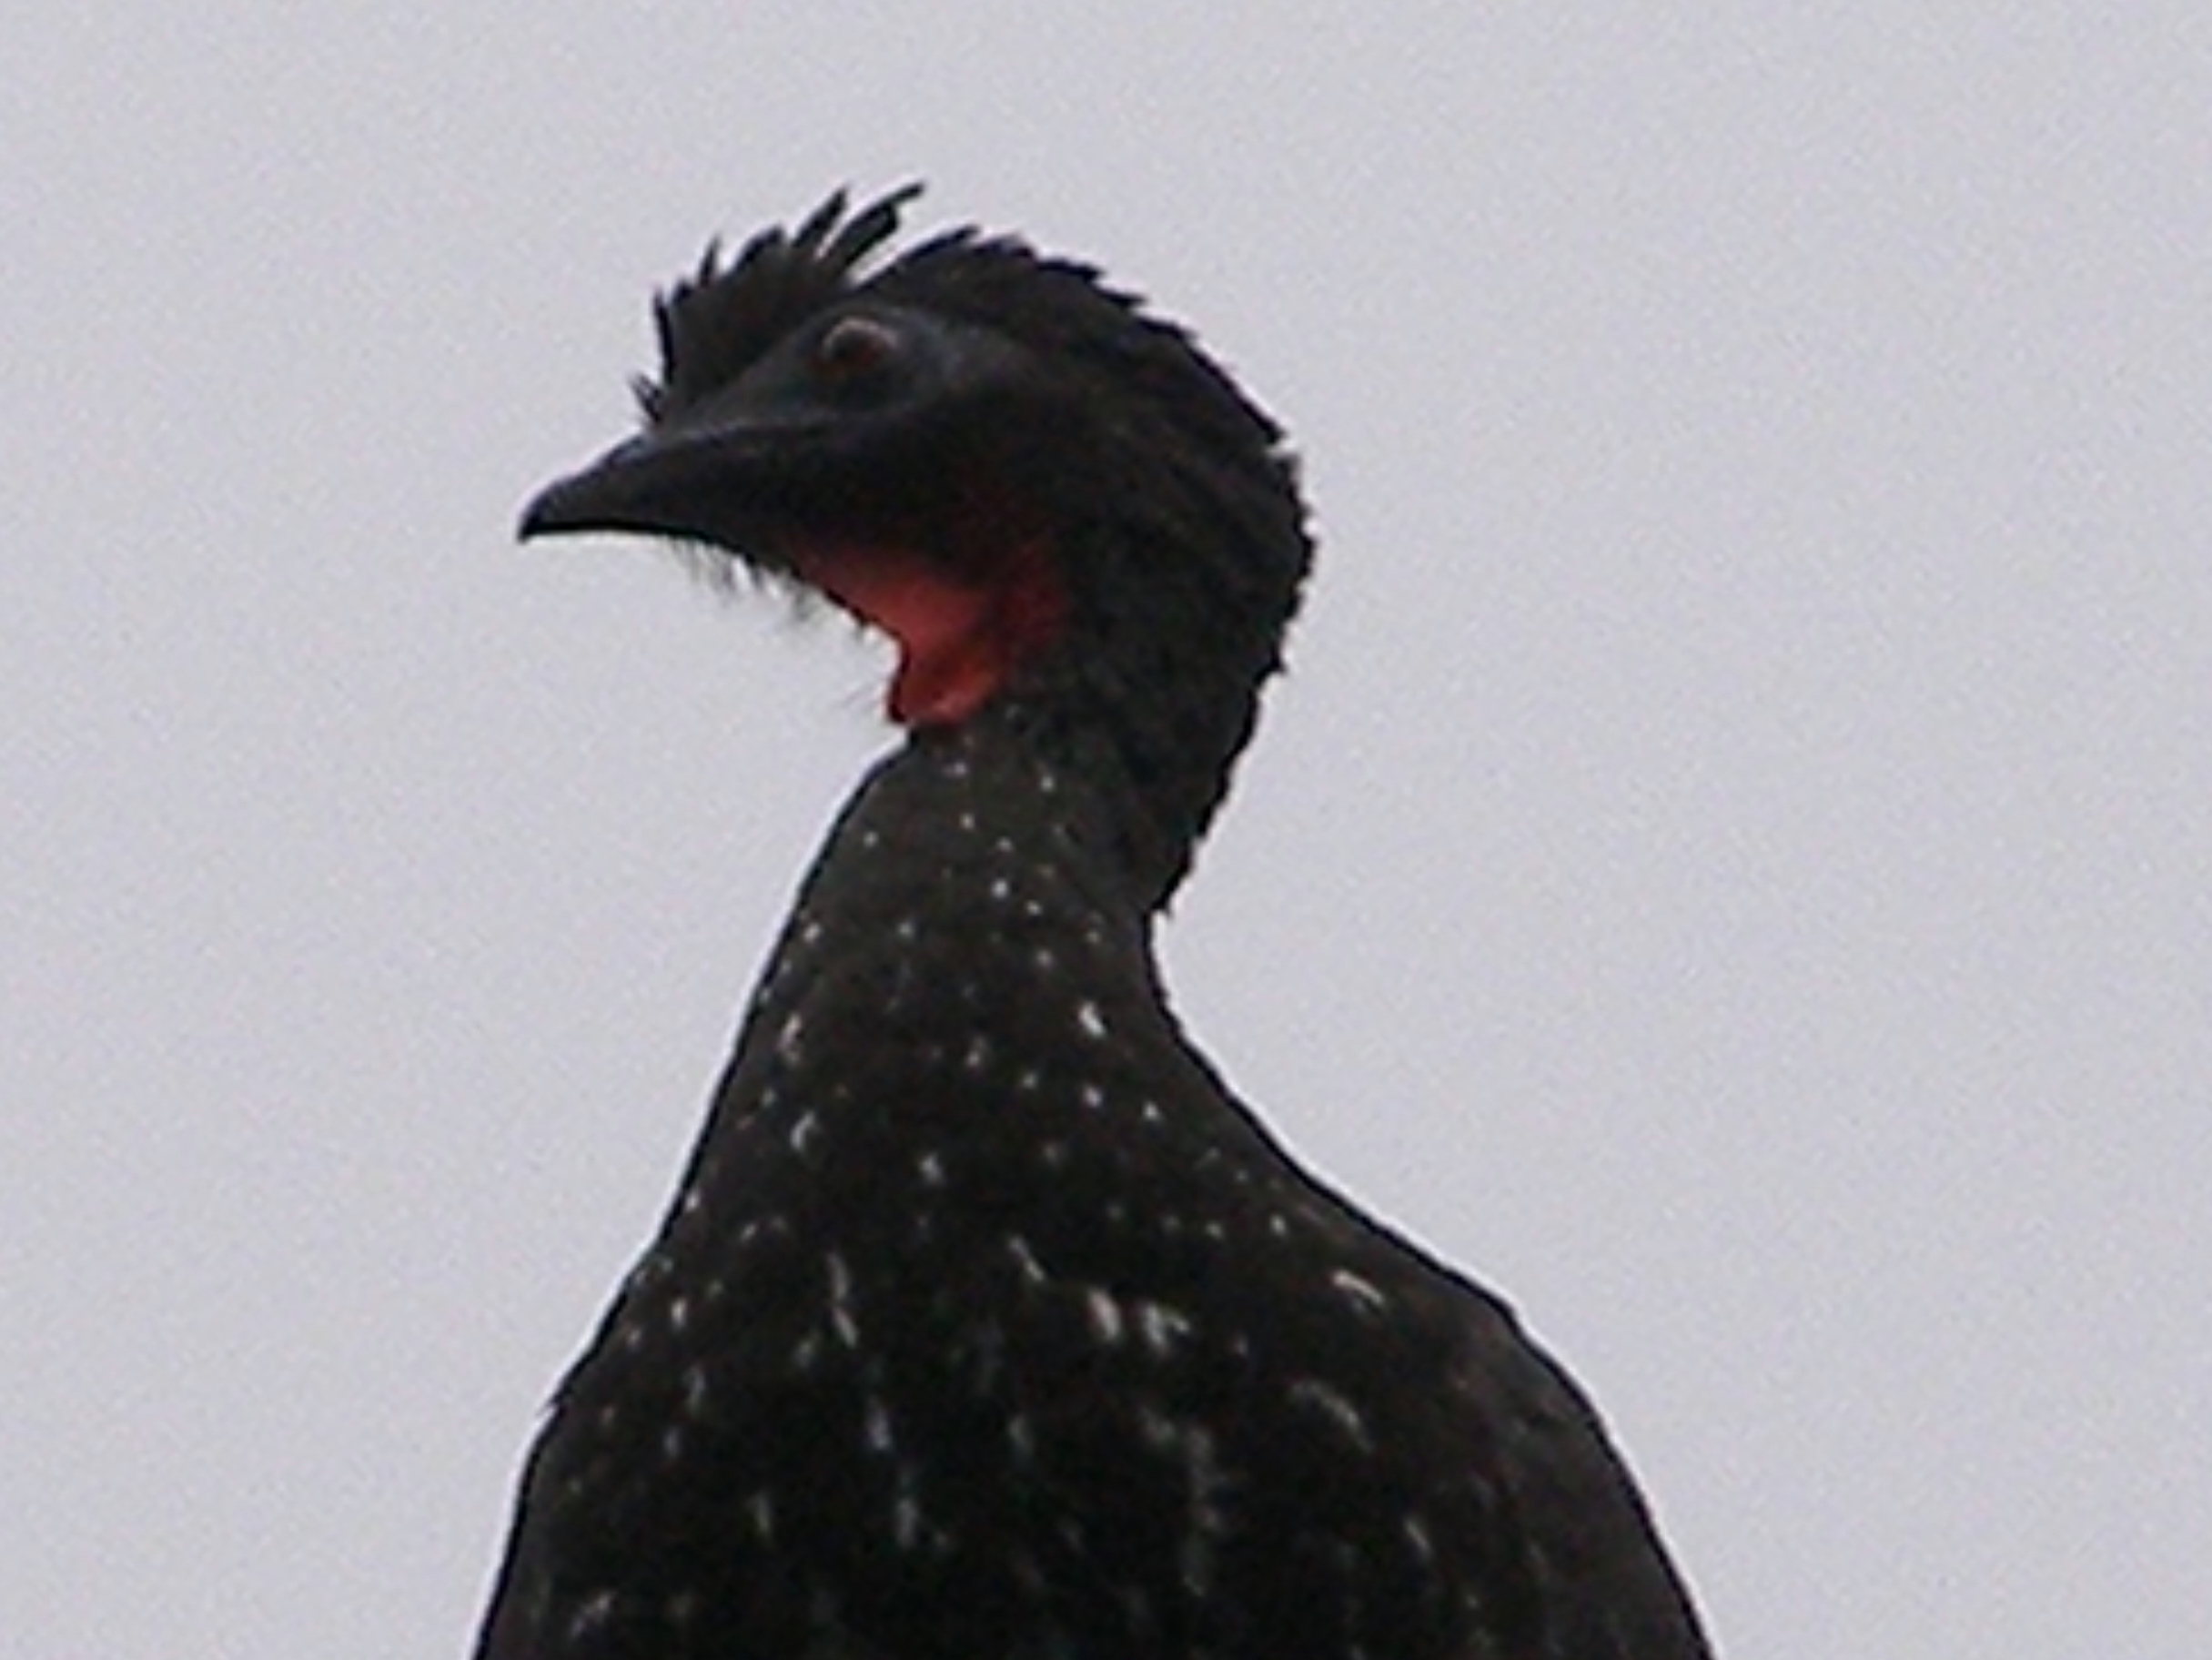 Click picture to see more Crested Guan photos.